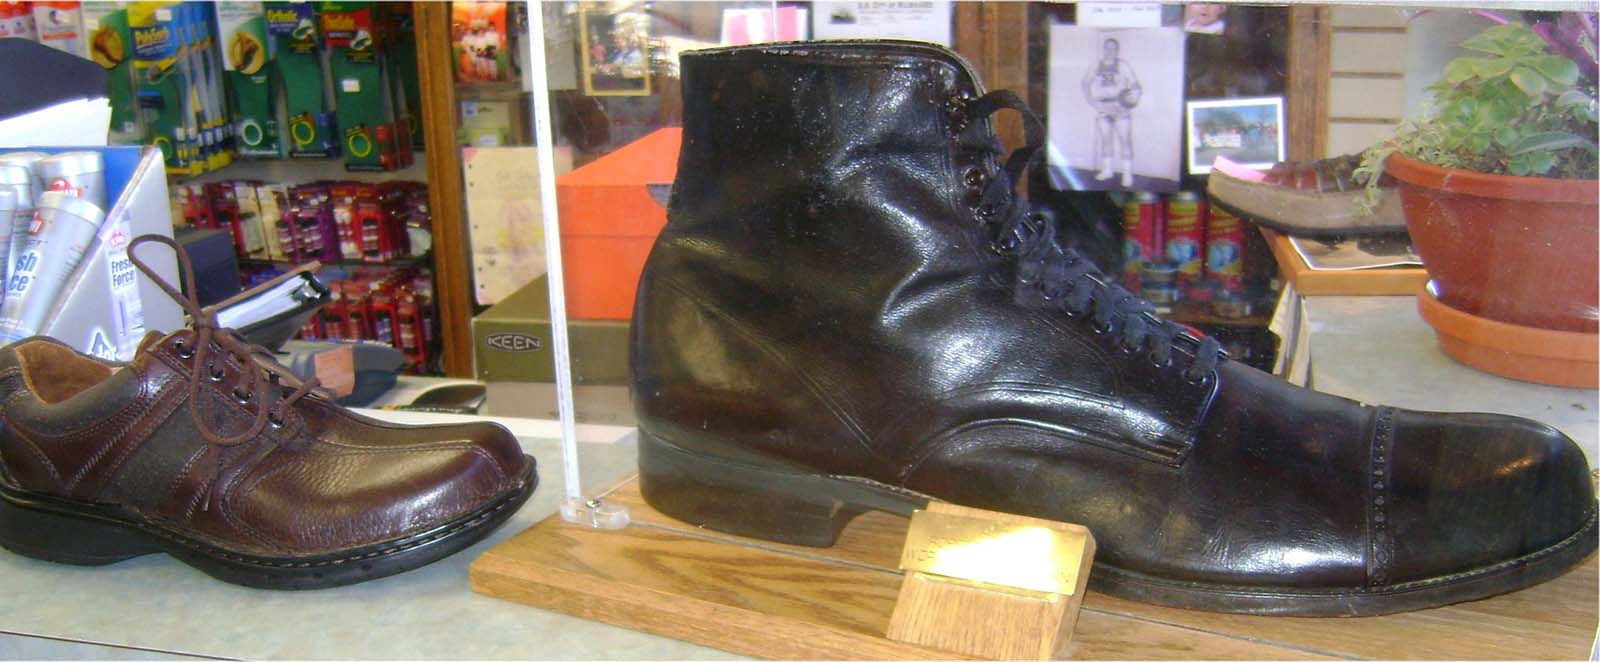 Wadlow’s shoe (US size 37 AA; UK size 36 or approximately European size 75) compared to a US size 12.